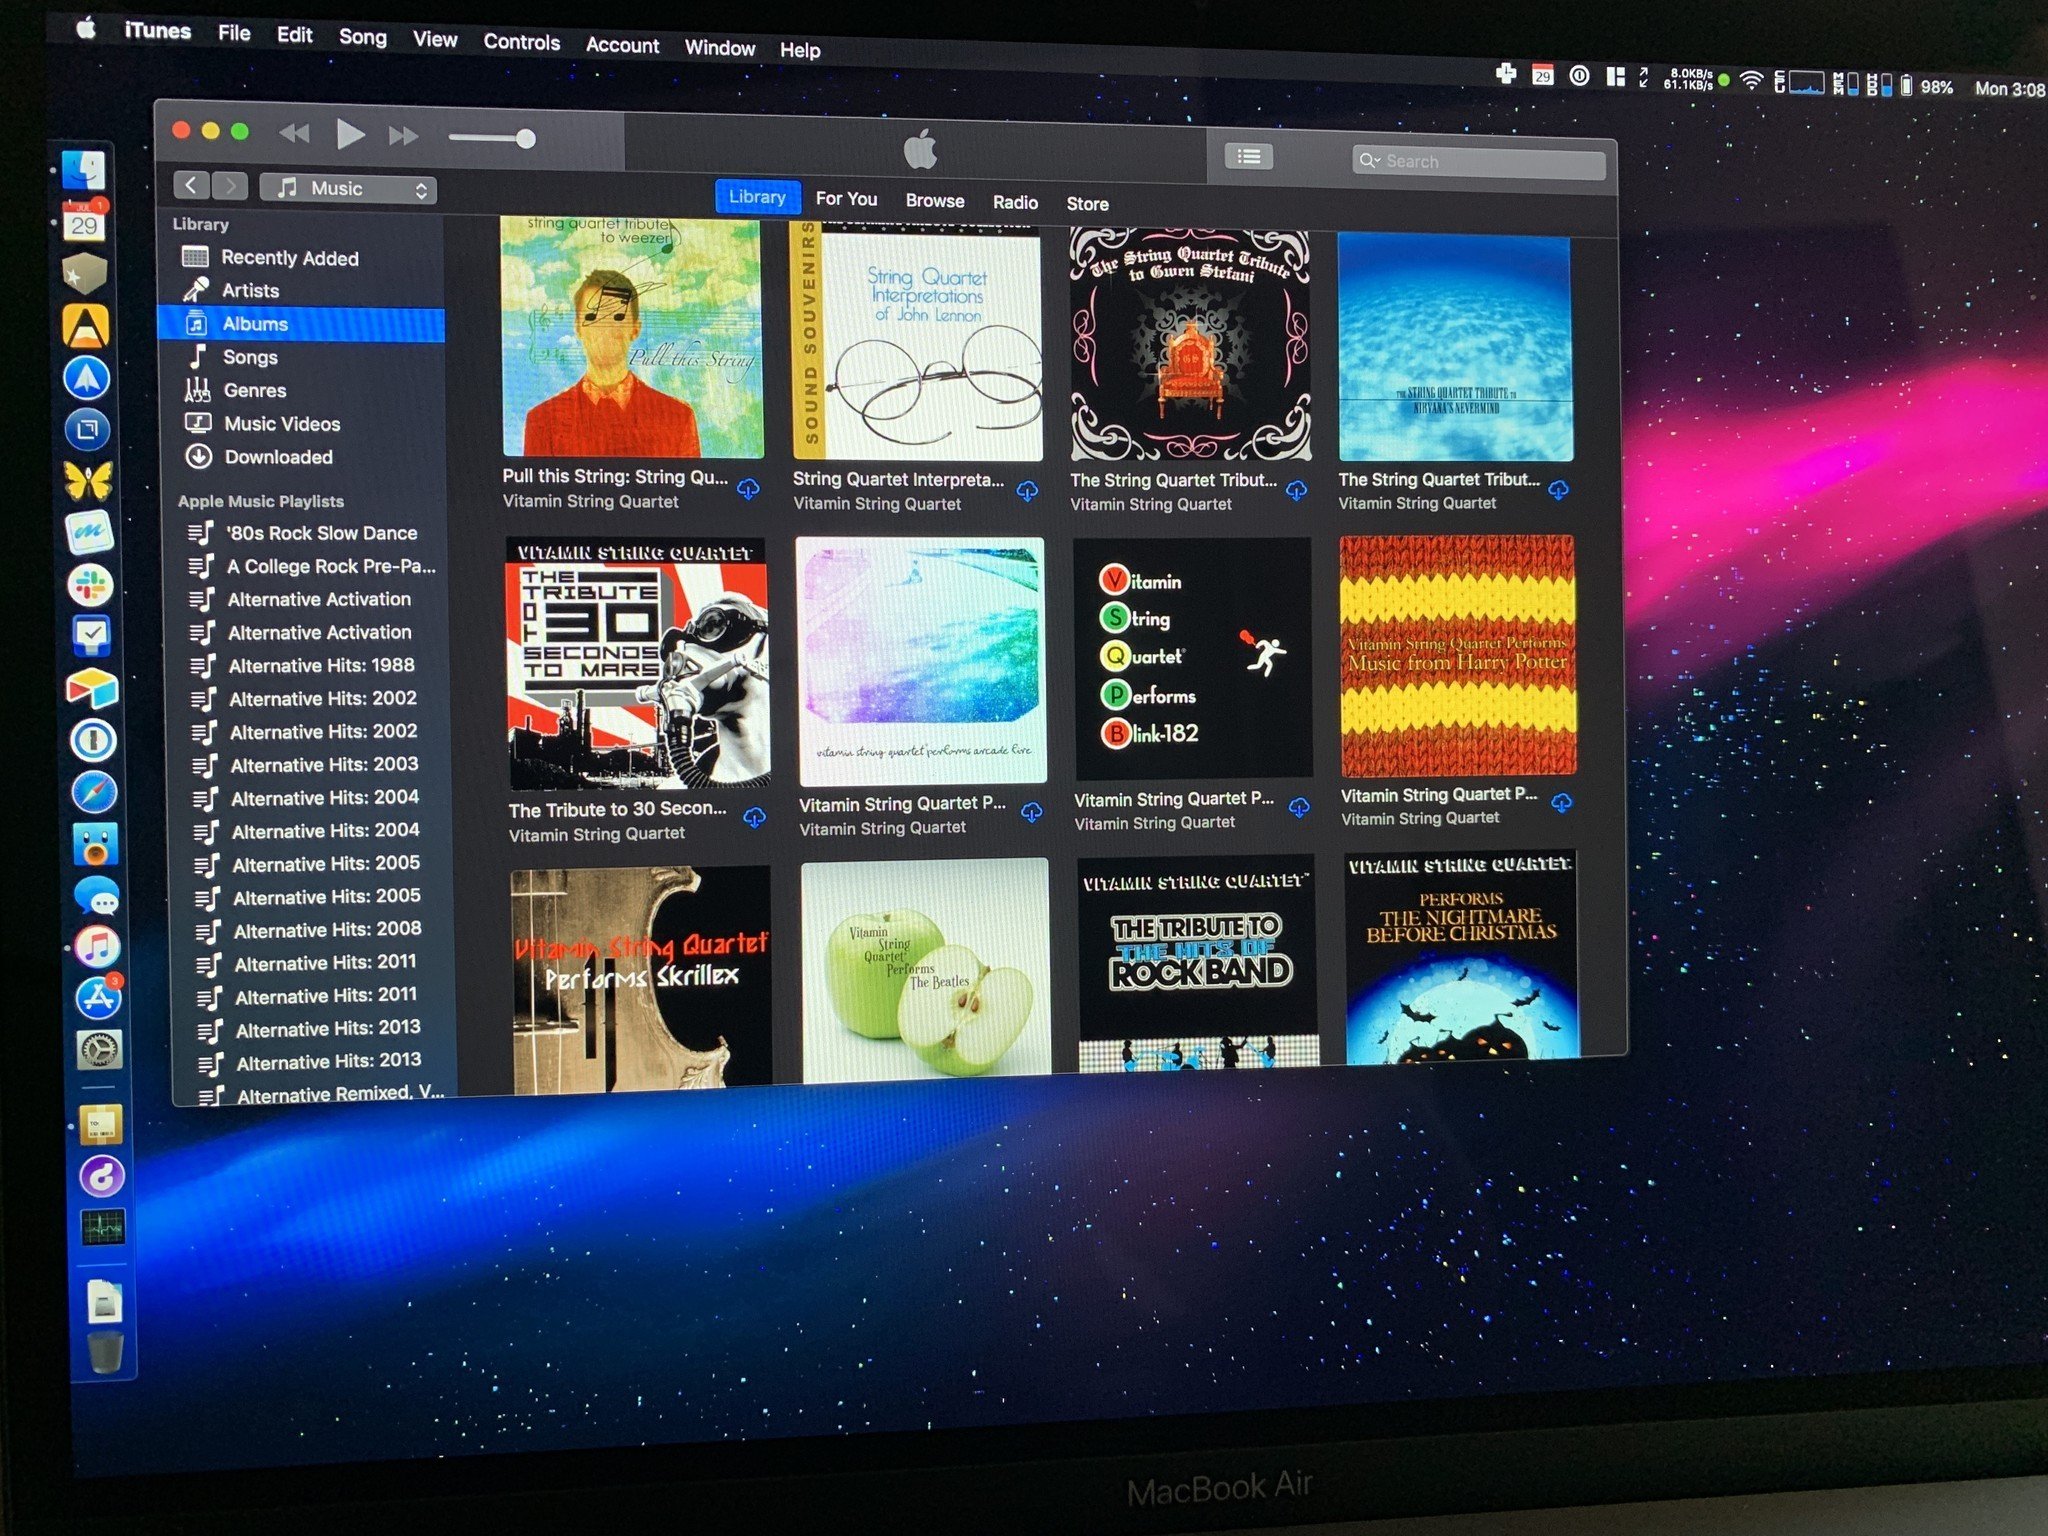 MacBook Air with iTunes and iCloud Music Library